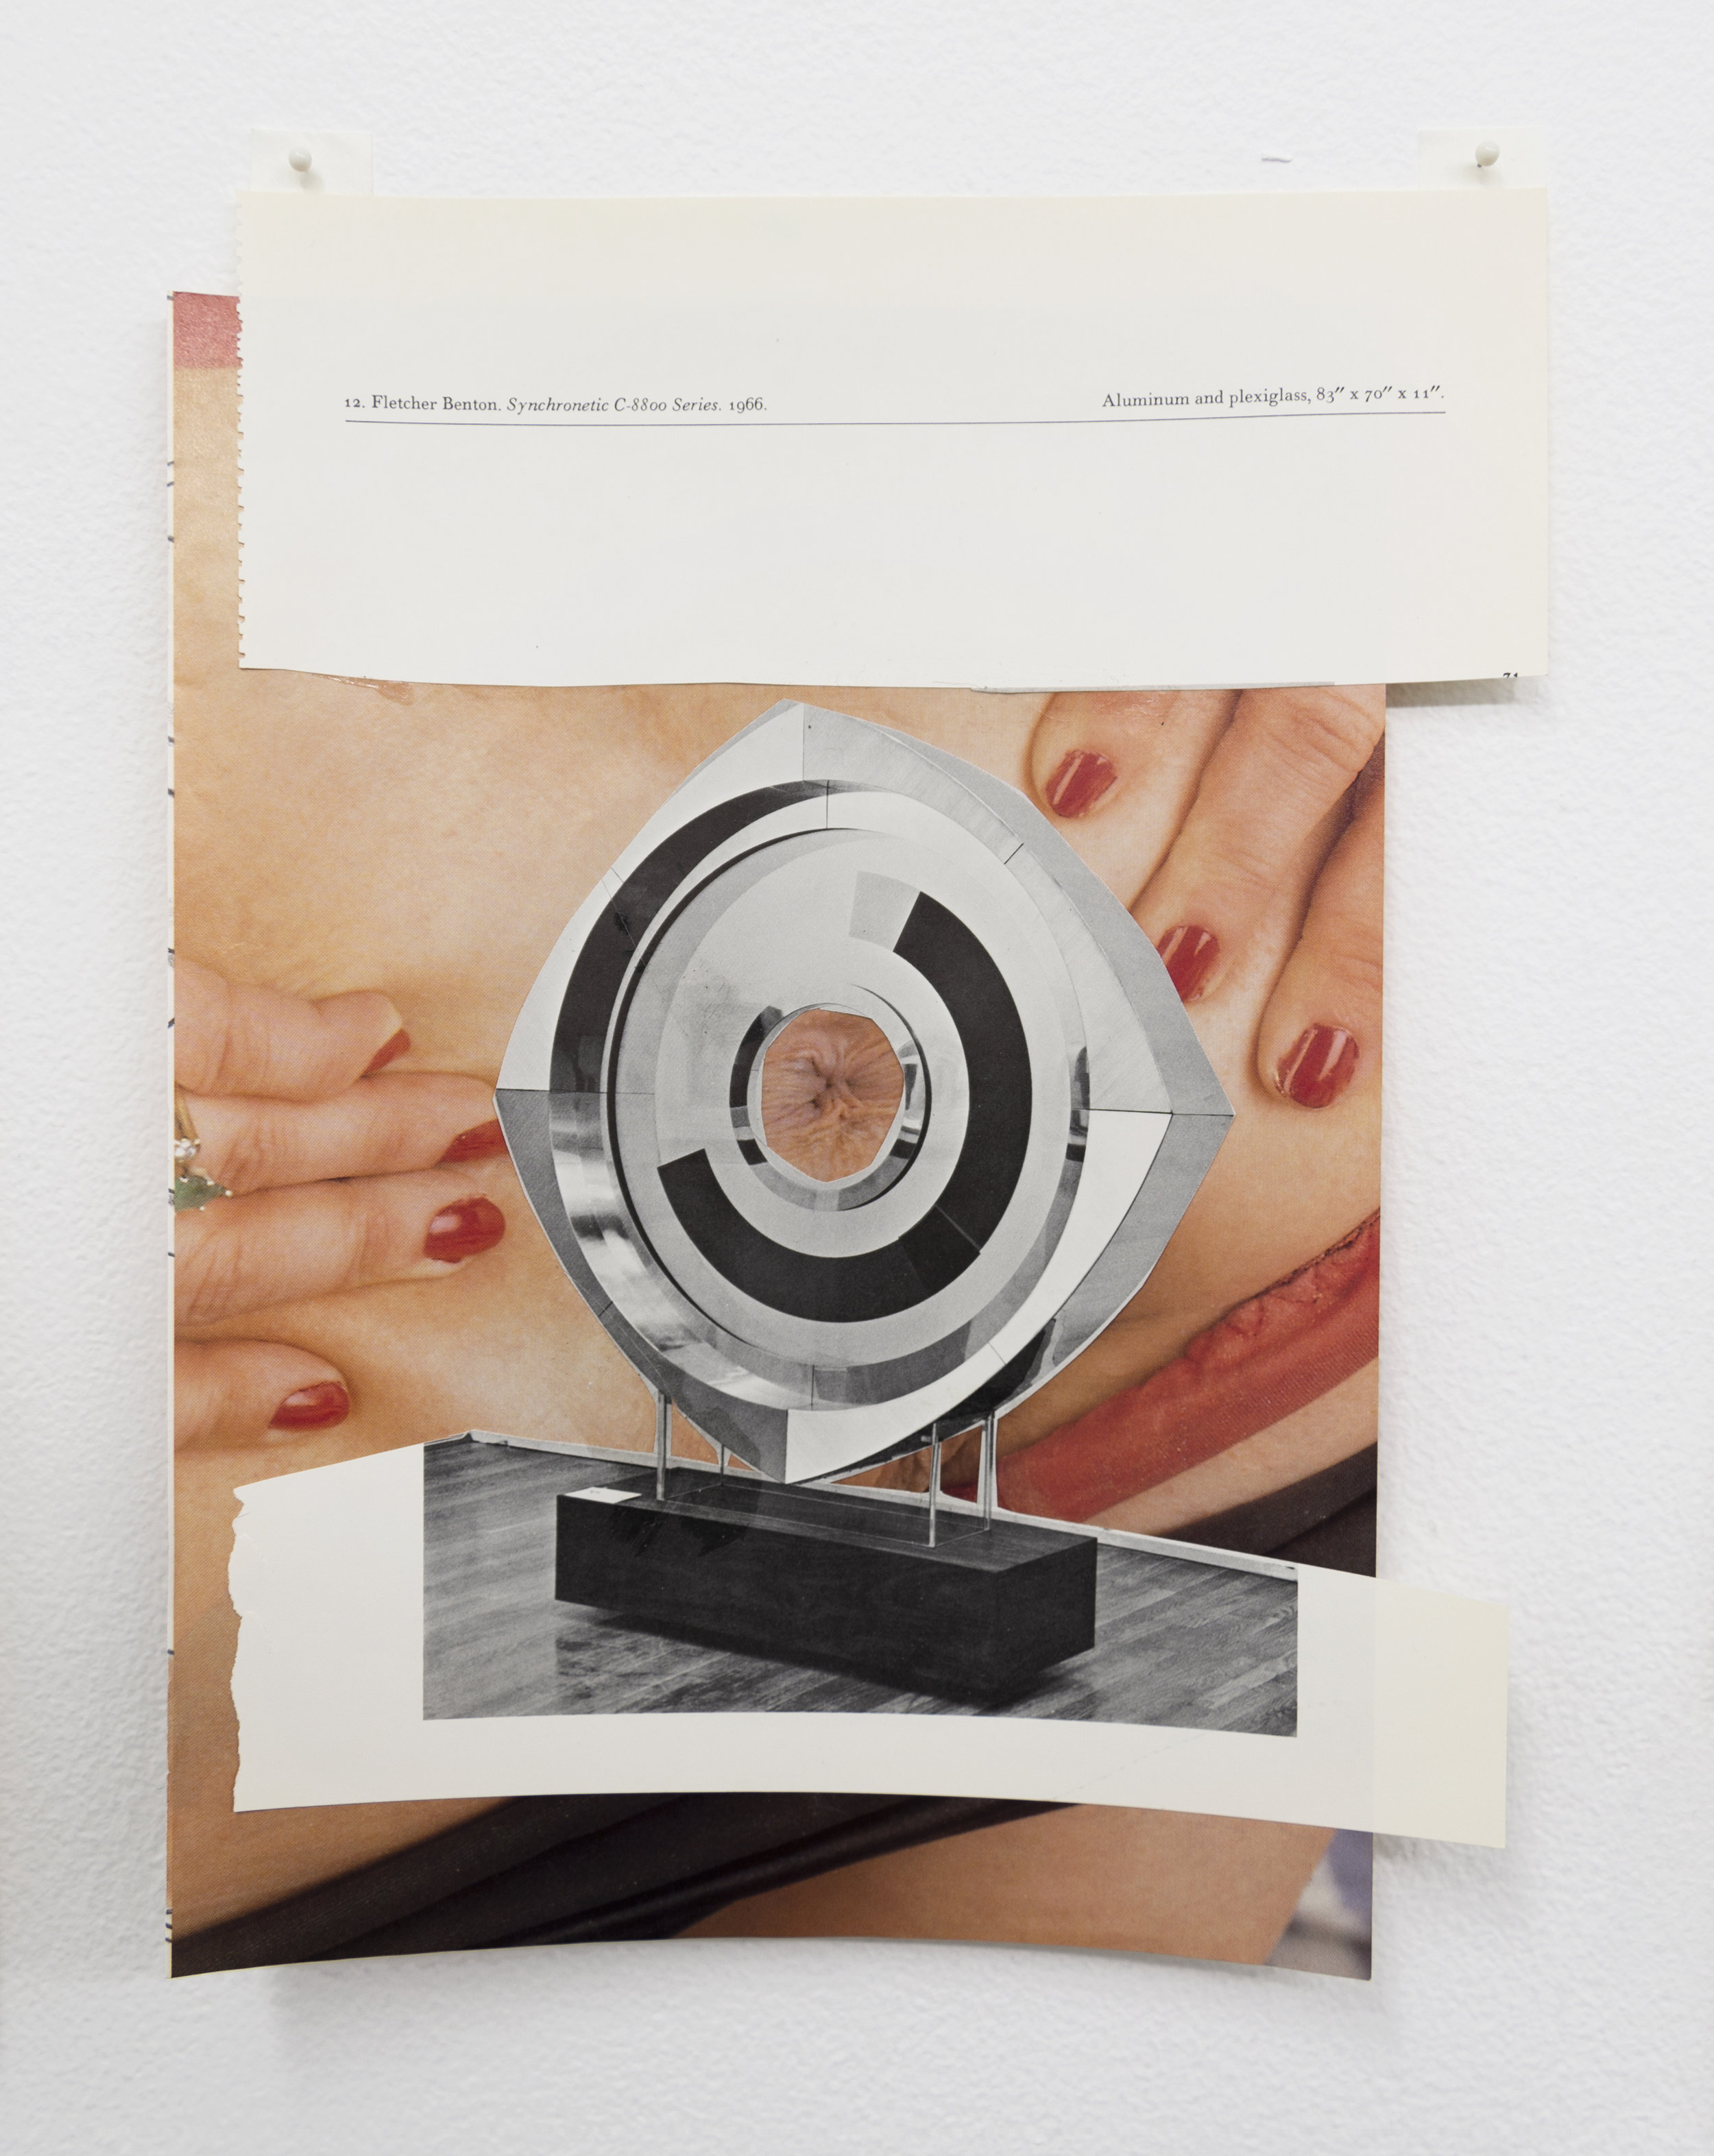  Narcissister,  Studies for Participatory Sculptures, Untitled (Showing butthole, after Fletcher Benton) , 2018, Paper, rubber cement, 11.5 x 8.75 in  